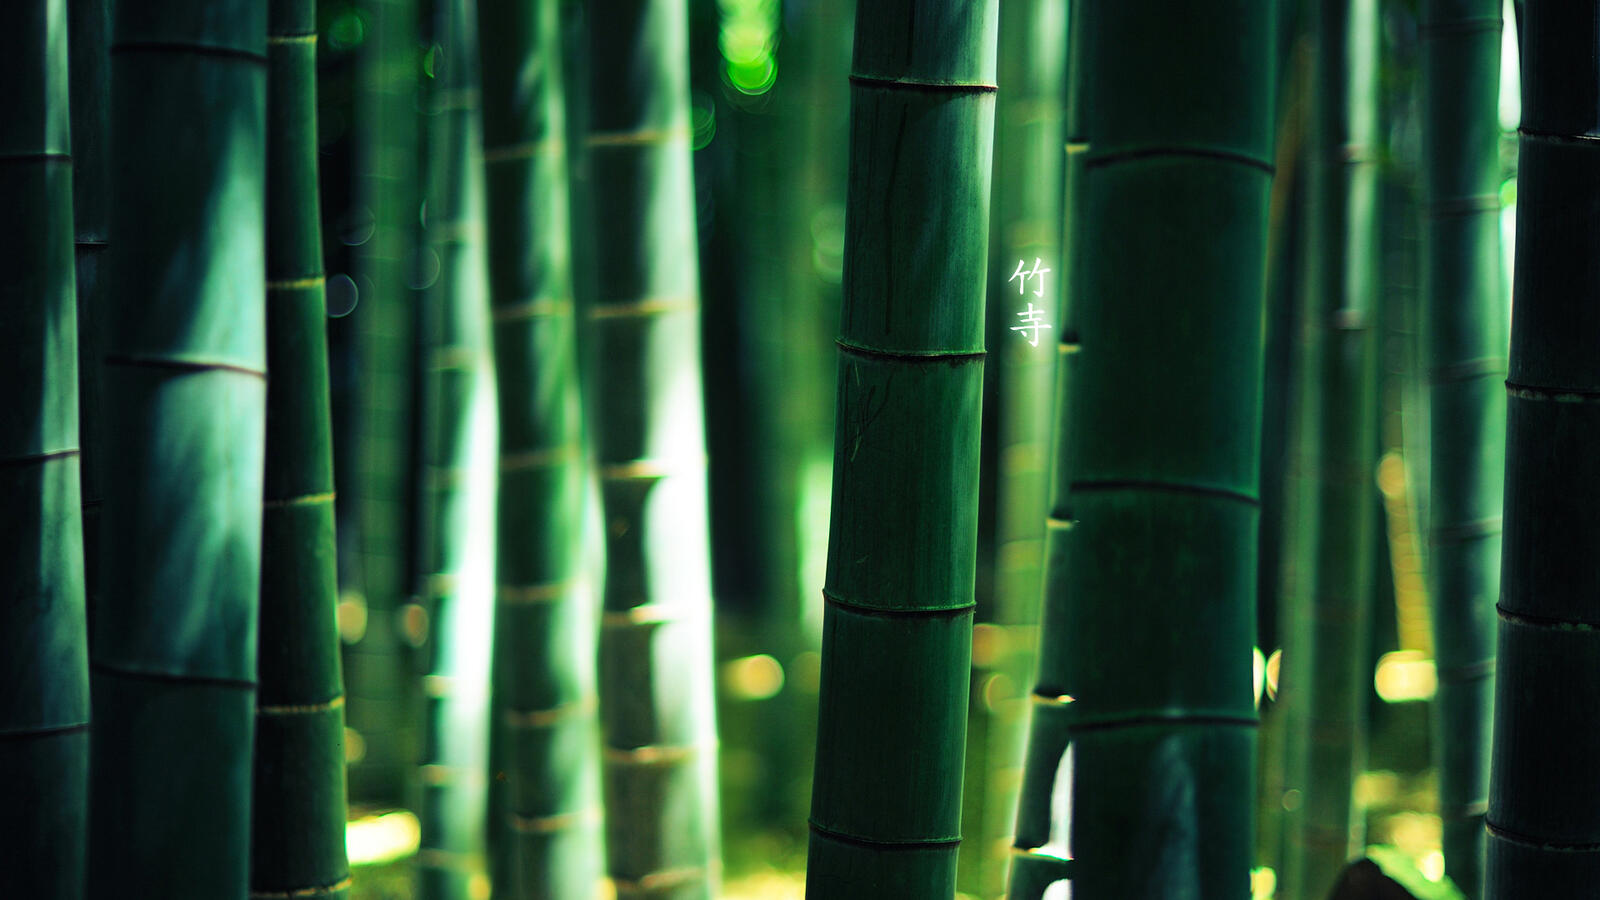 Wallpapers bamboo thicket green on the desktop